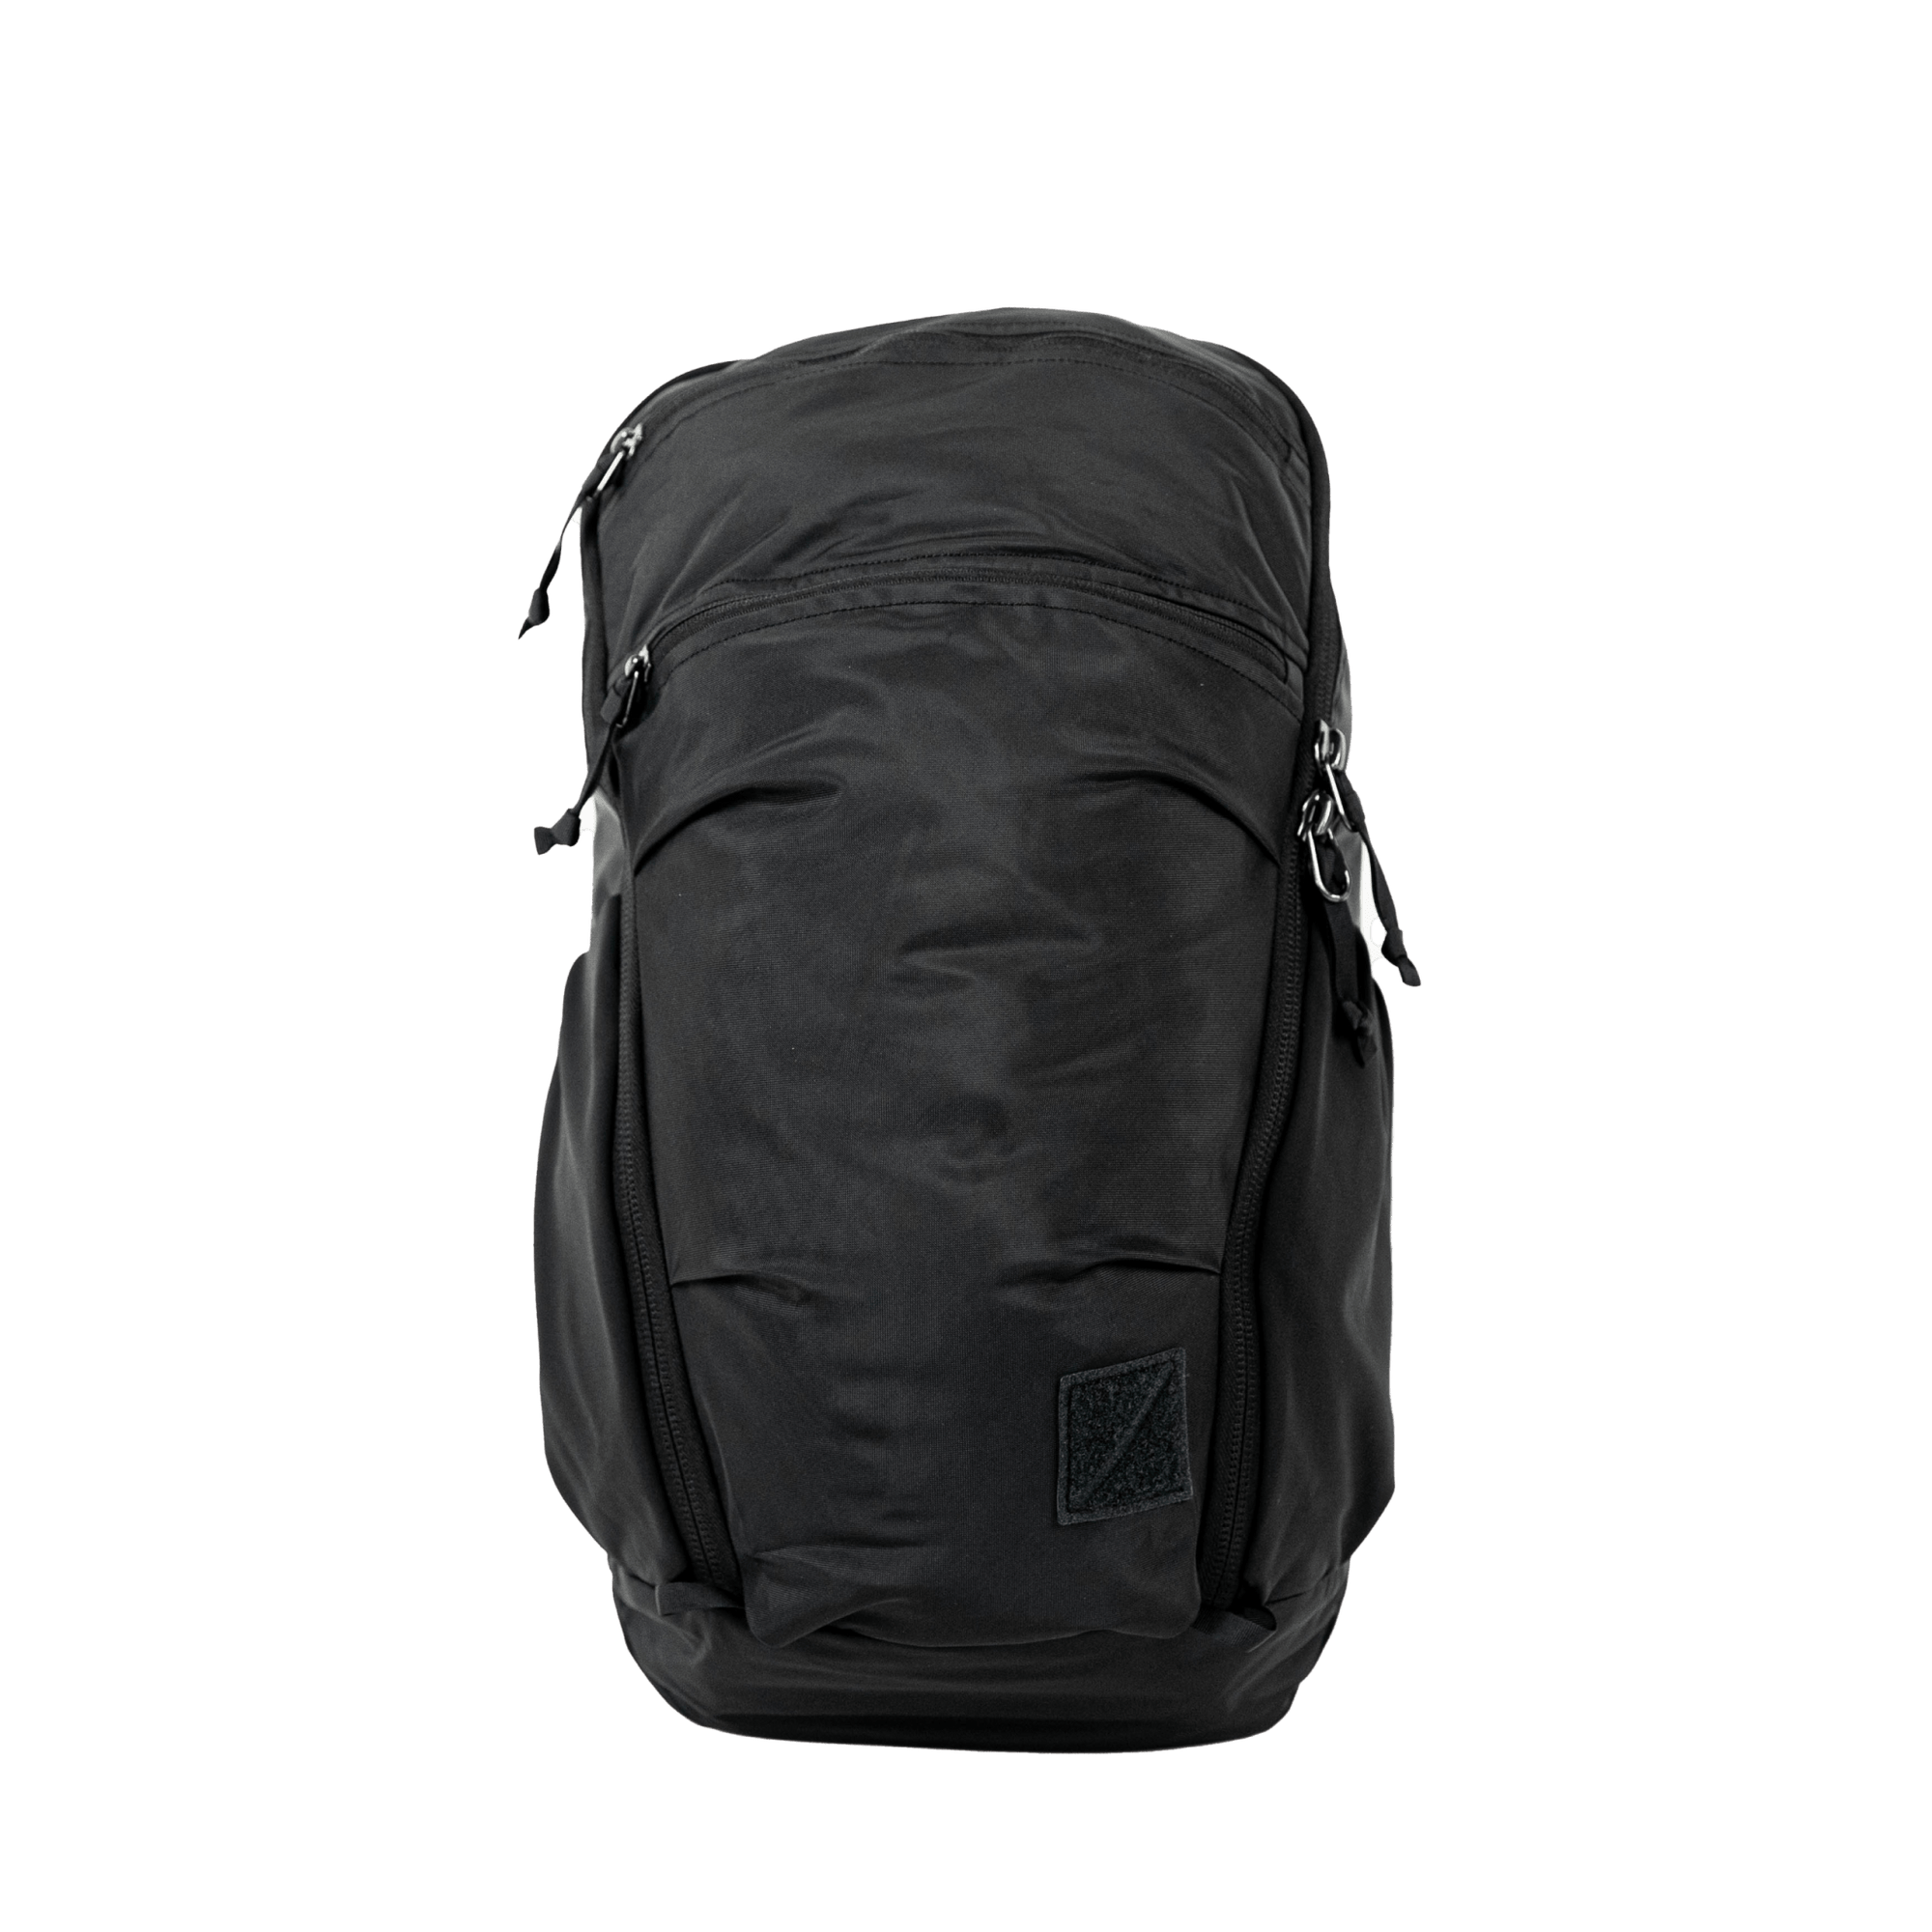 MOUNTAIN Panel Loader 22L in solution dyed black